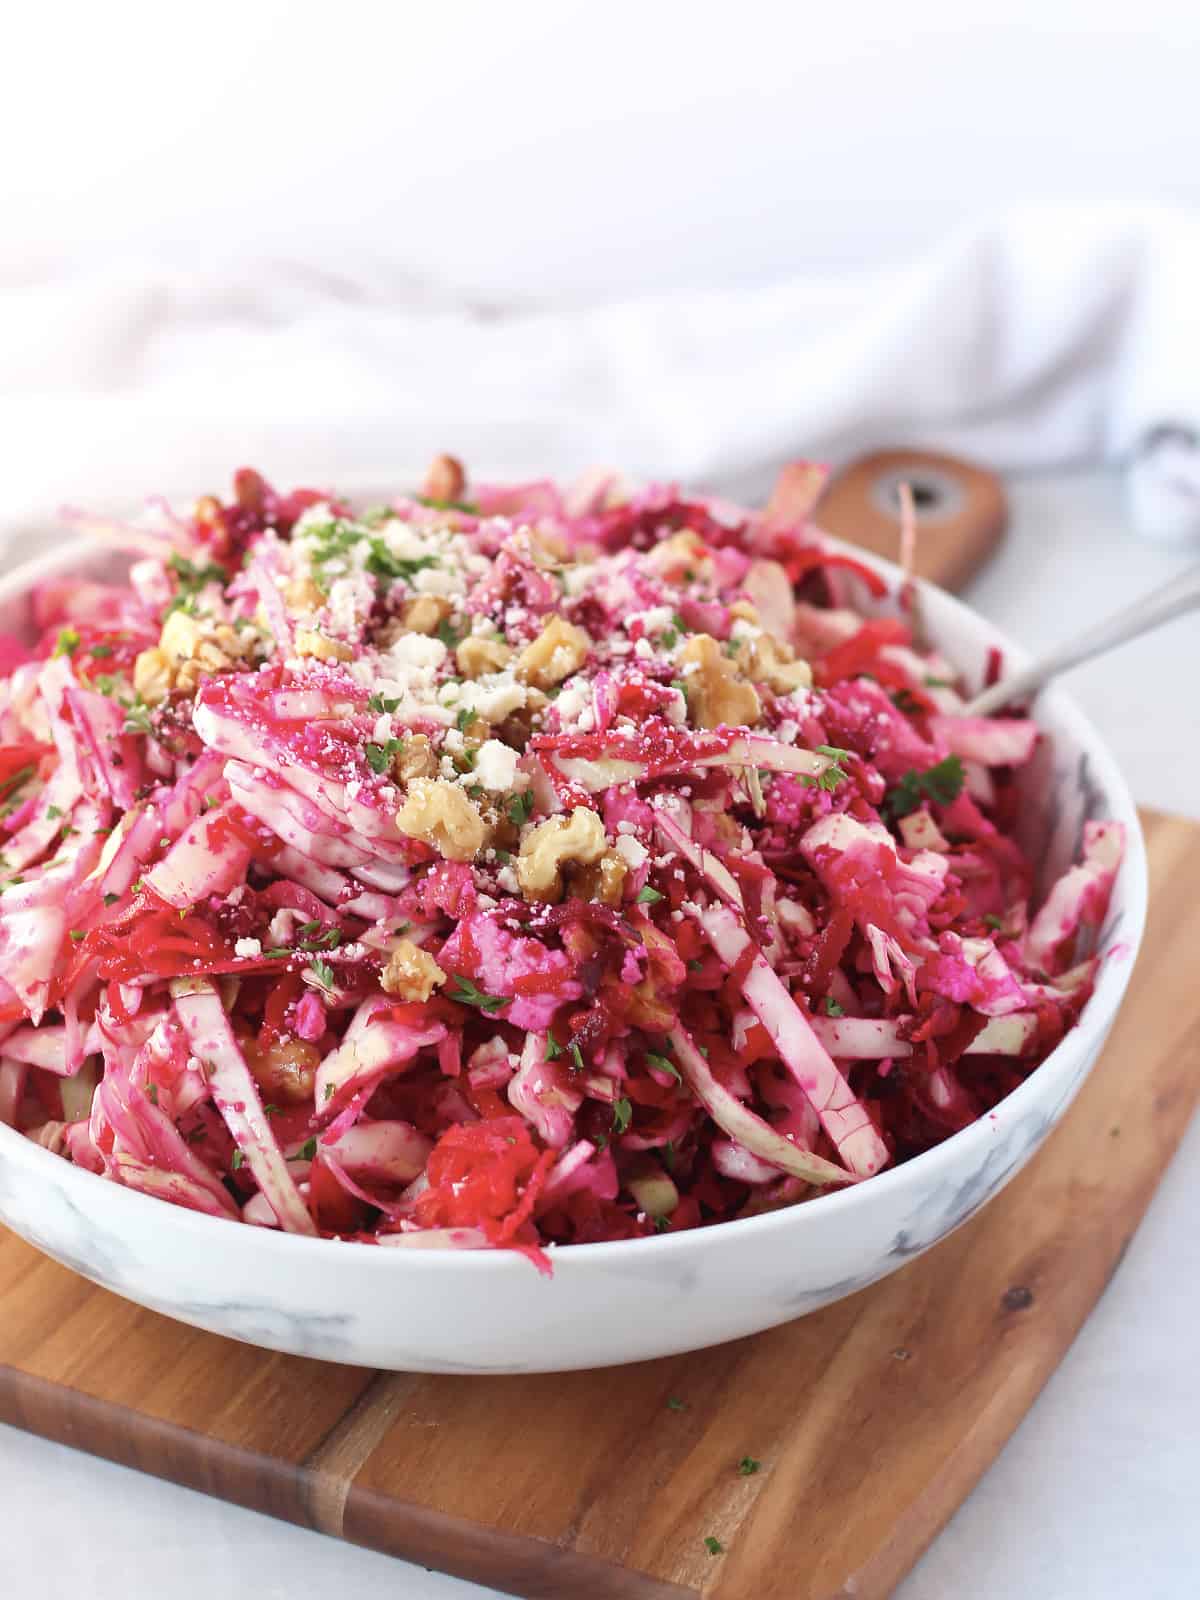 A large bowl of slaw on a wooden board.